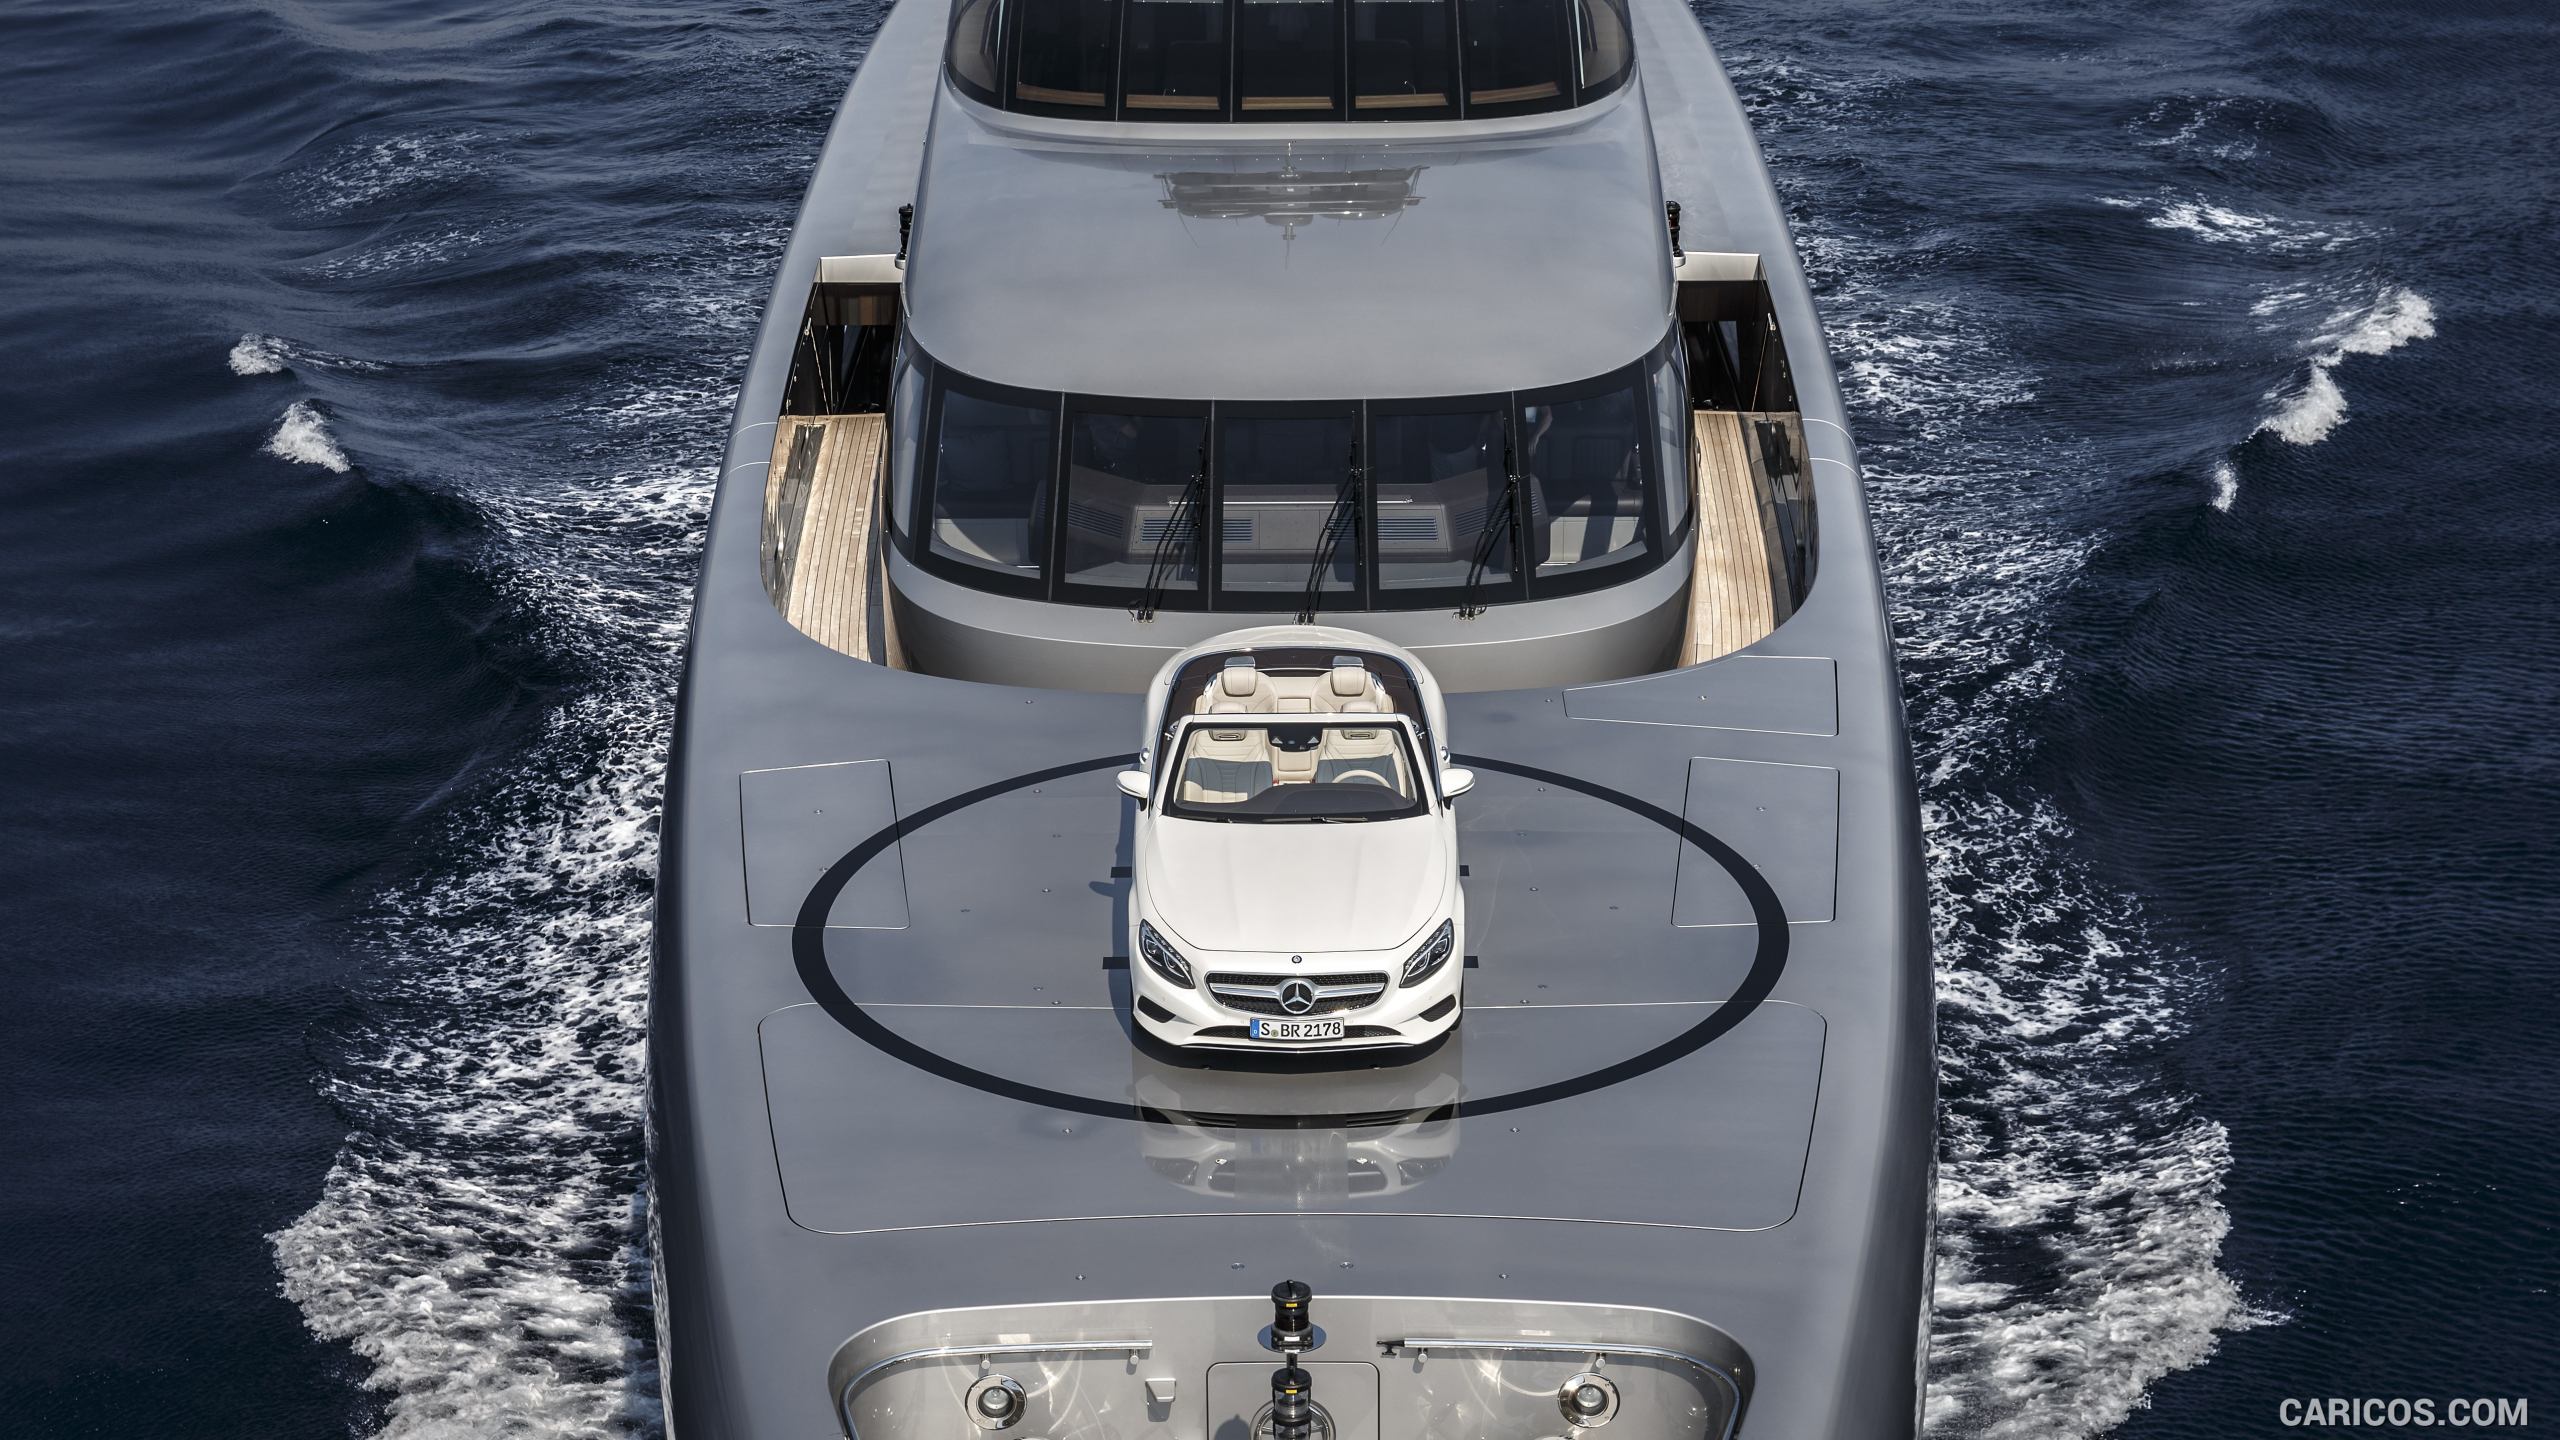 2017 Mercedes-Benz S-Class S500 Cabriolet aboard Silver Fast Yacht - Front, #52 of 56